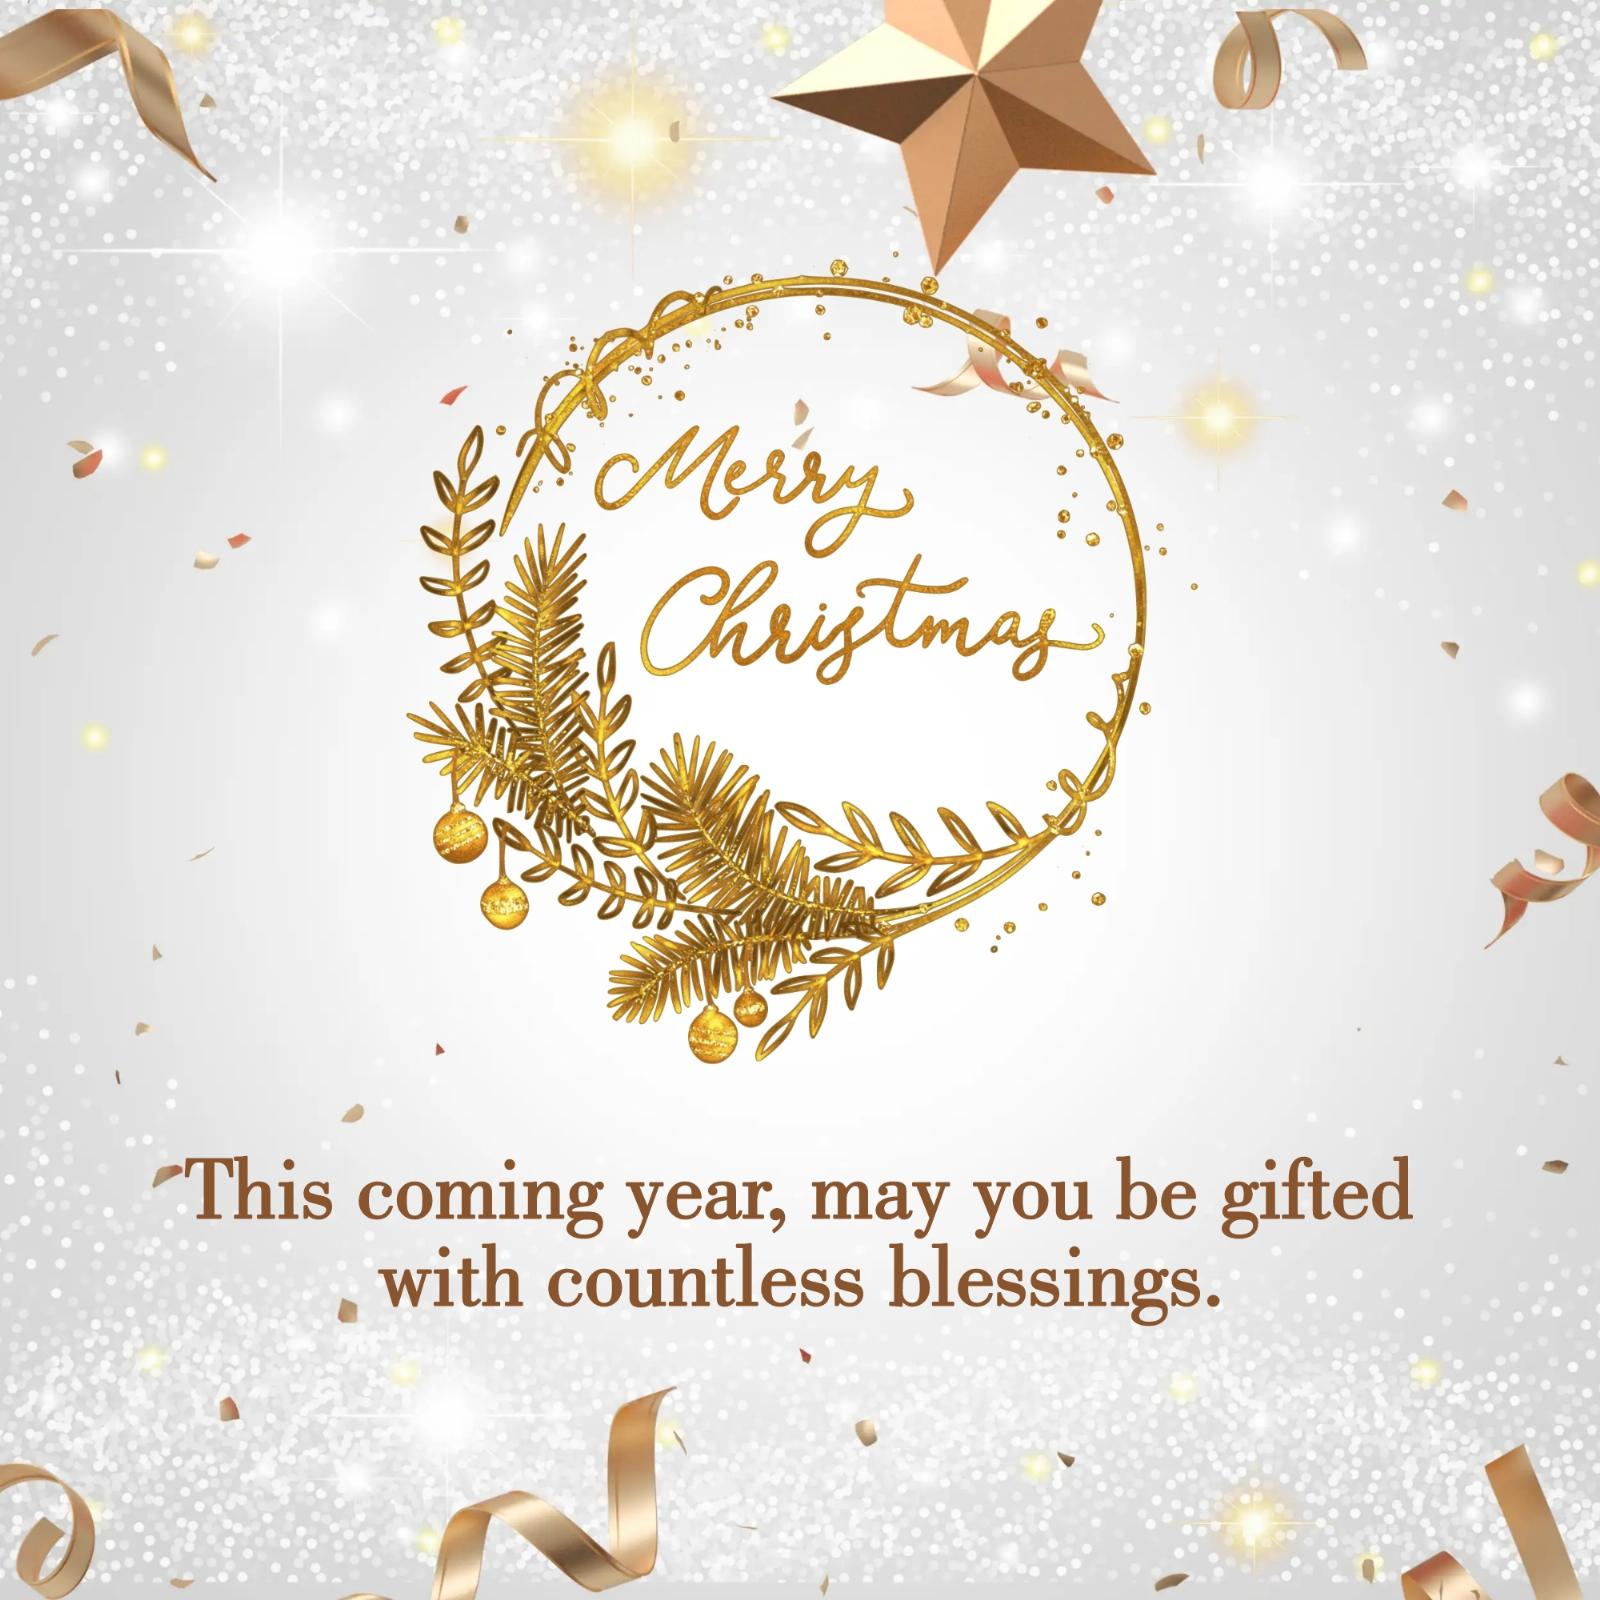 This coming year may you be gifted with countless blessings